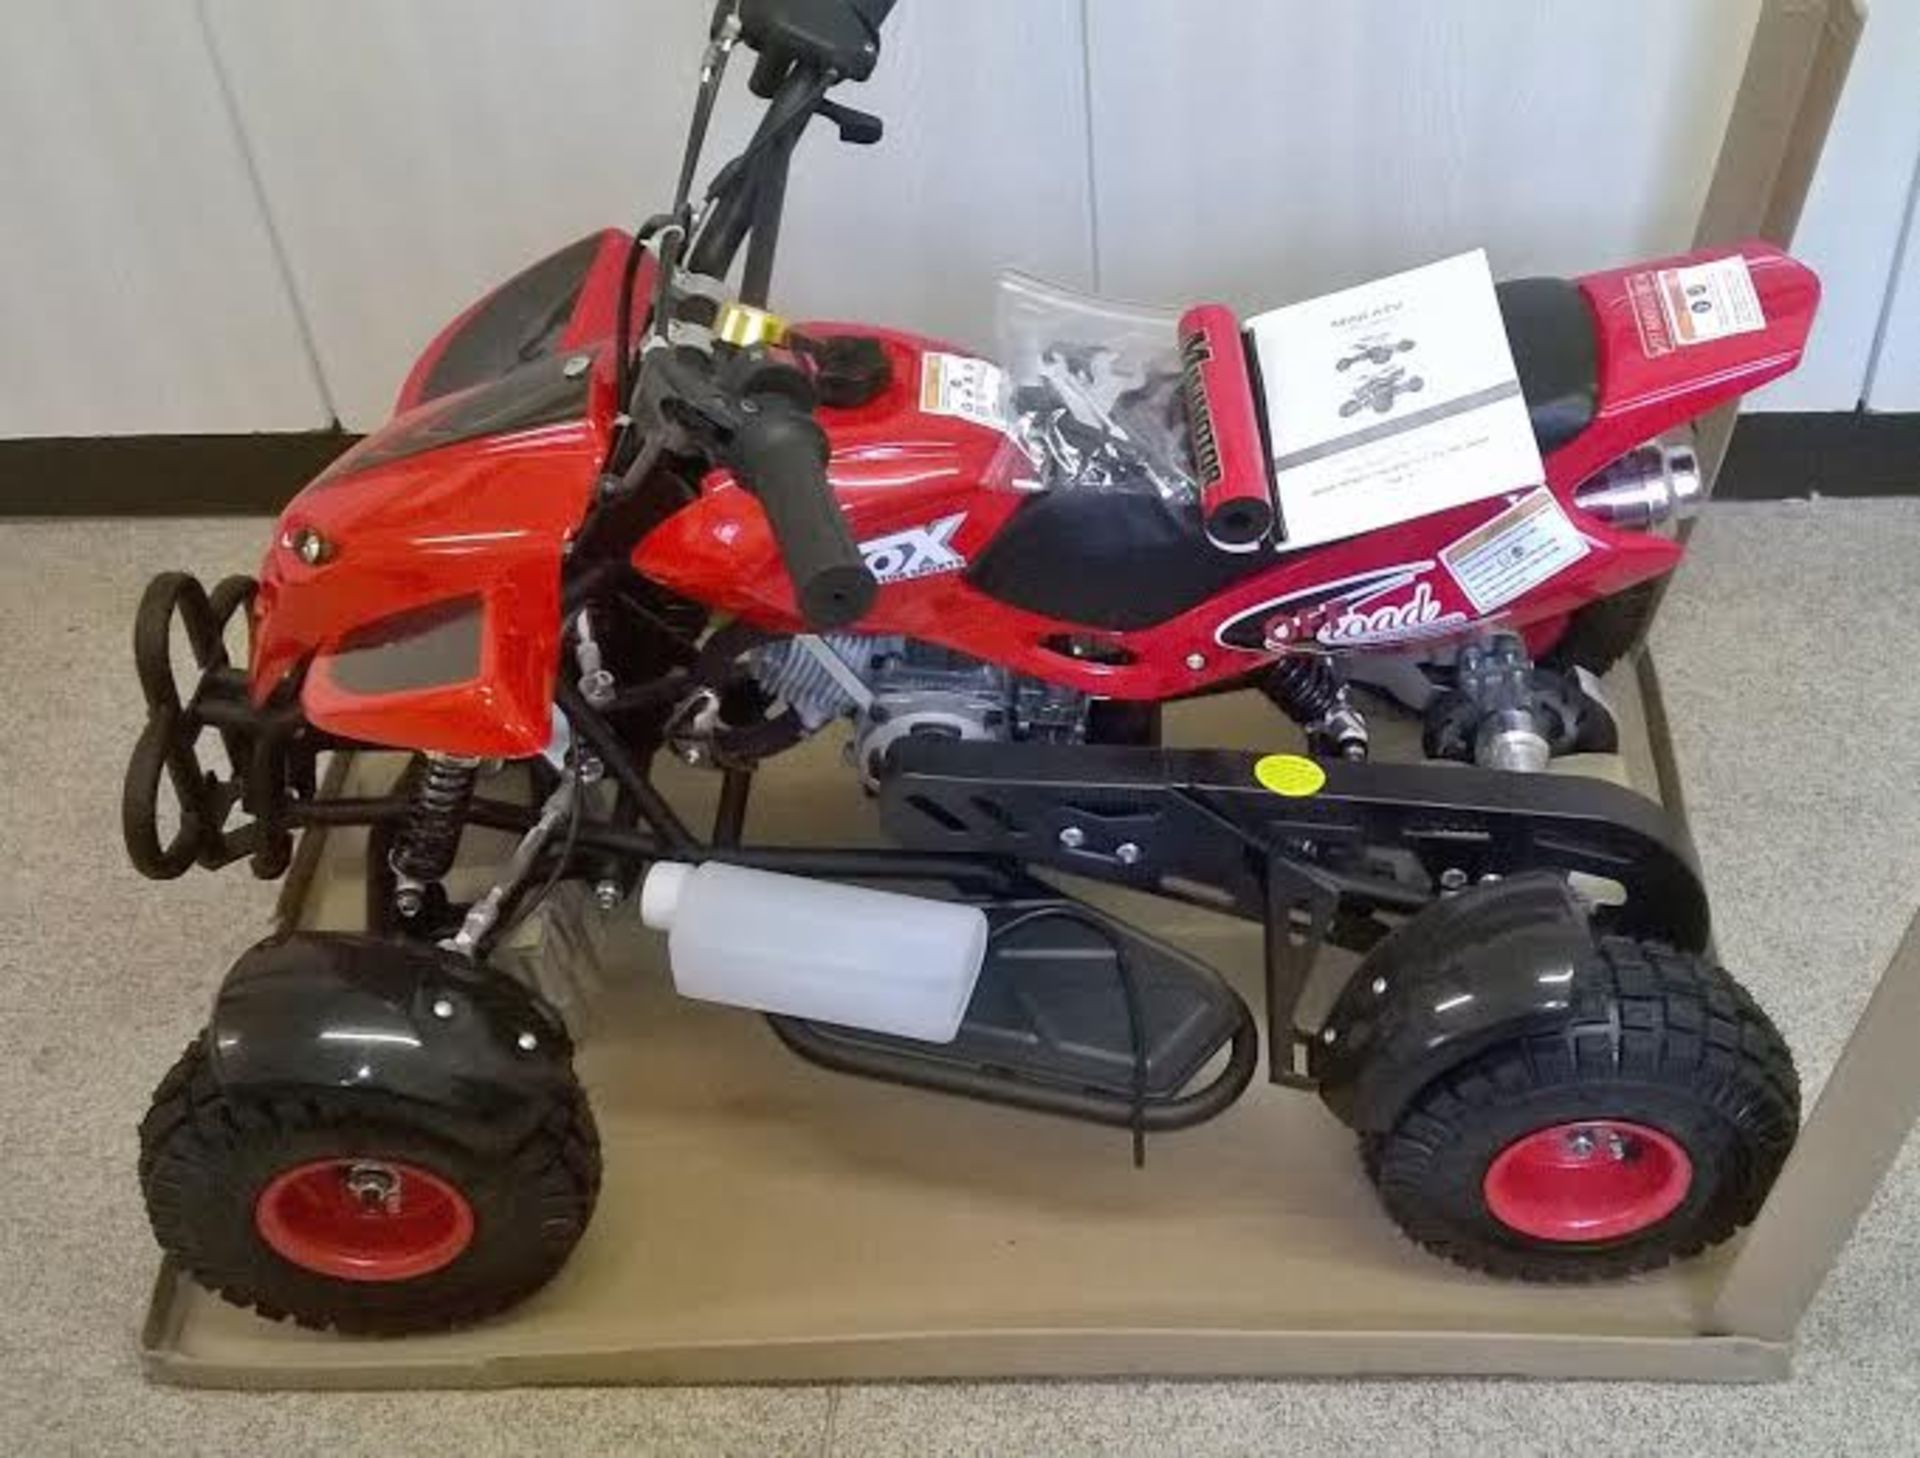 1 BRAND NEW BOXED NO VAT 49CC 2STROKE PETROL MINI ATV QUAD BIKE 2015 MODEL IN RED.
This is the - Image 8 of 8